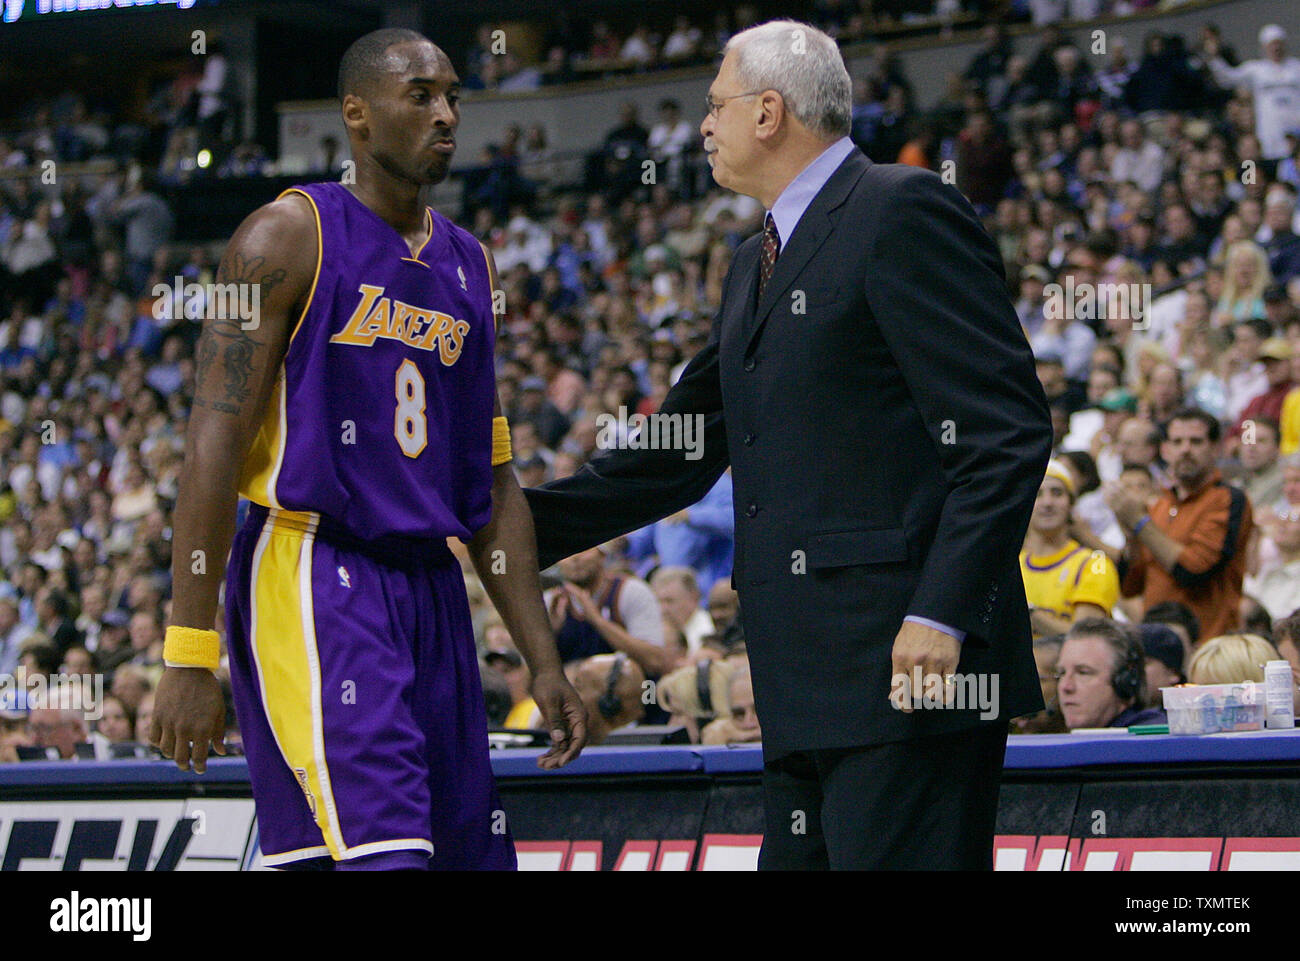 Los Angeles Lakers guard Kobe Bryant (L) is taken out of the game by head coach Phil Jackson (R) late in the second quarter at the Pepsi Center in Denver November 2, 2005.  Bryant and Jackson begin a new season together again.    (UPI Photo/Gary C. Caskey) Stock Photo